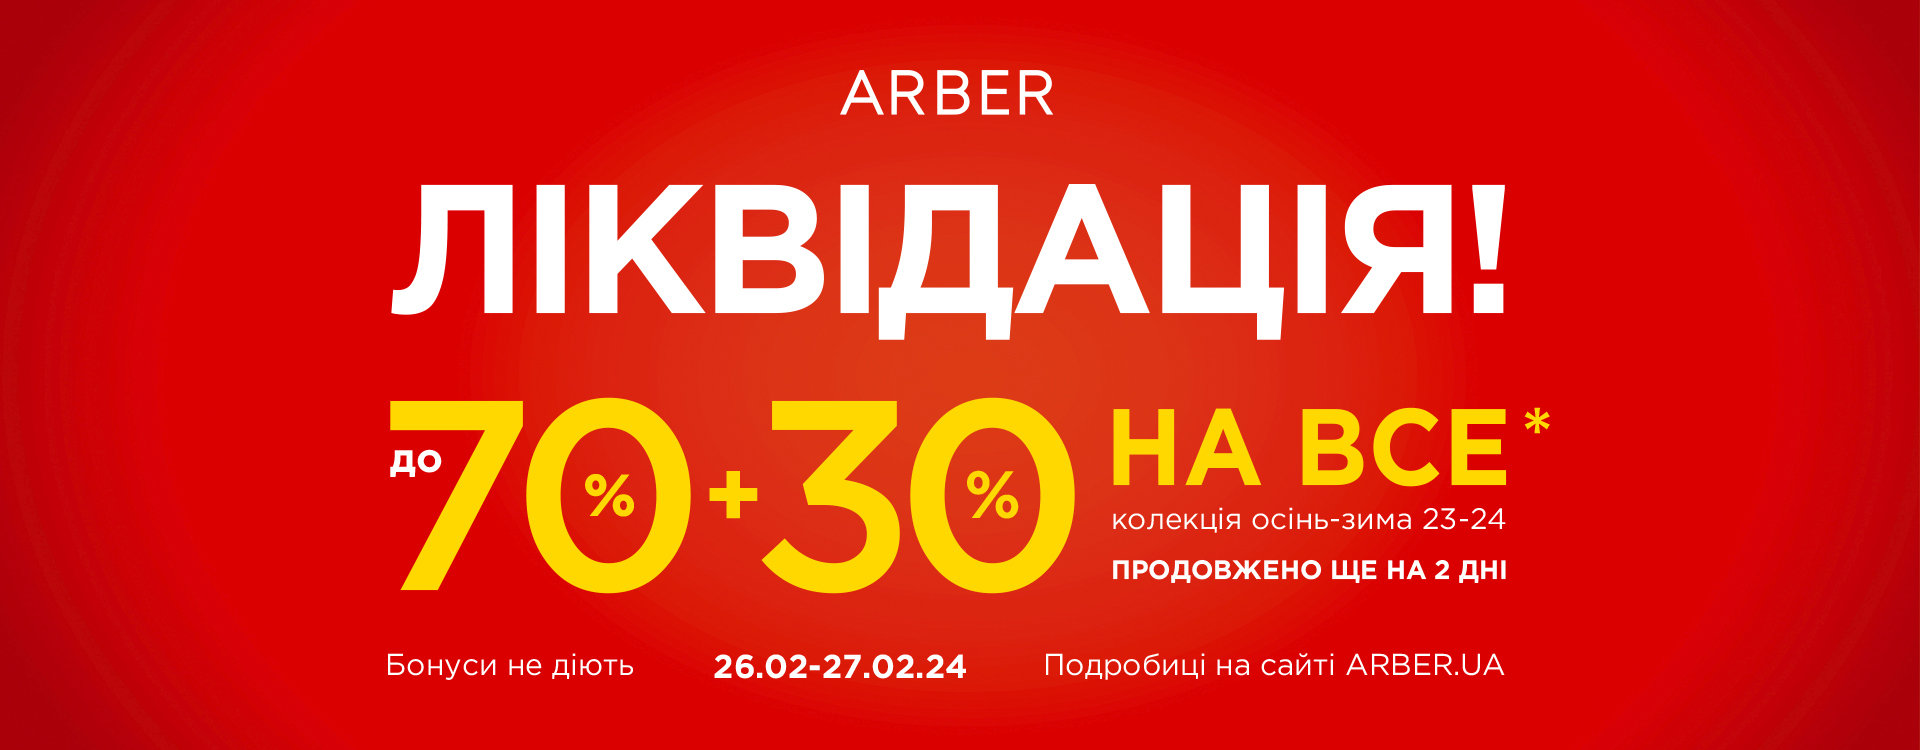 Discounts up to -70%+30% in ARBER